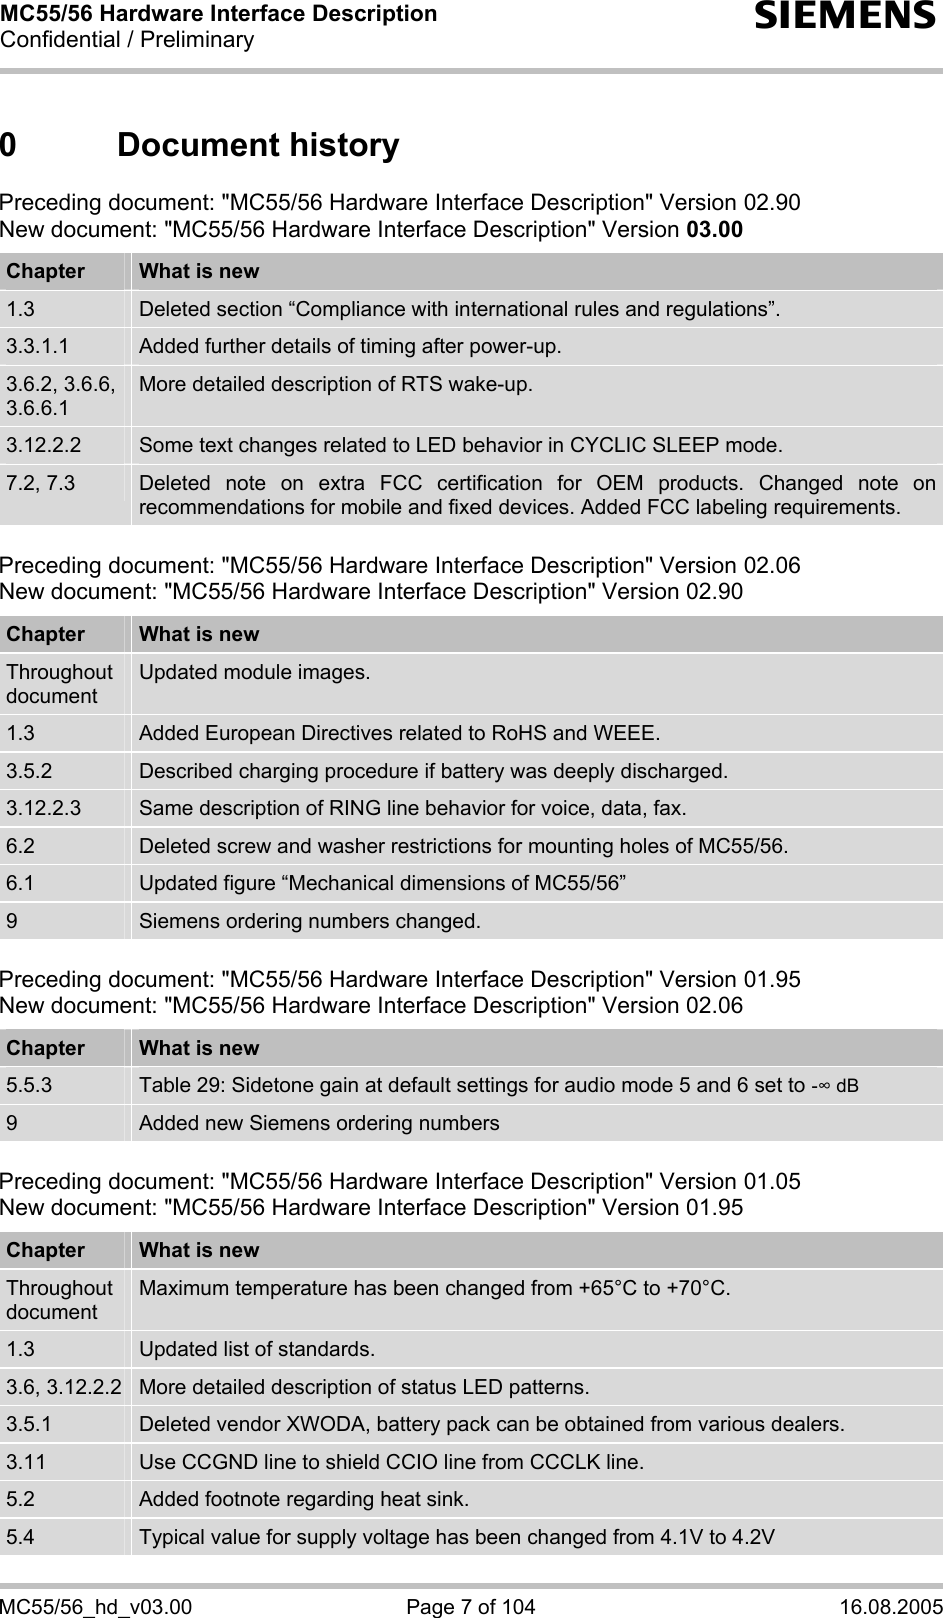 MC55/56 Hardware Interface Description Confidential / Preliminary s MC55/56_hd_v03.00  Page 7 of 104  16.08.2005 0 Document history Preceding document: &quot;MC55/56 Hardware Interface Description&quot; Version 02.90 New document: &quot;MC55/56 Hardware Interface Description&quot; Version 03.00  Chapter  What is new 1.3  Deleted section “Compliance with international rules and regulations”. 3.3.1.1  Added further details of timing after power-up. 3.6.2, 3.6.6, 3.6.6.1 More detailed description of RTS wake-up. 3.12.2.2  Some text changes related to LED behavior in CYCLIC SLEEP mode. 7.2, 7.3  Deleted note on extra FCC certification for OEM products. Changed note on recommendations for mobile and fixed devices. Added FCC labeling requirements.  Preceding document: &quot;MC55/56 Hardware Interface Description&quot; Version 02.06 New document: &quot;MC55/56 Hardware Interface Description&quot; Version 02.90  Chapter  What is new Throughout document Updated module images. 1.3  Added European Directives related to RoHS and WEEE. 3.5.2  Described charging procedure if battery was deeply discharged. 3.12.2.3  Same description of RING line behavior for voice, data, fax. 6.2  Deleted screw and washer restrictions for mounting holes of MC55/56. 6.1  Updated figure “Mechanical dimensions of MC55/56” 9  Siemens ordering numbers changed.  Preceding document: &quot;MC55/56 Hardware Interface Description&quot; Version 01.95 New document: &quot;MC55/56 Hardware Interface Description&quot; Version 02.06  Chapter  What is new 5.5.3  Table 29: Sidetone gain at default settings for audio mode 5 and 6 set to - dB 9  Added new Siemens ordering numbers  Preceding document: &quot;MC55/56 Hardware Interface Description&quot; Version 01.05 New document: &quot;MC55/56 Hardware Interface Description&quot; Version 01.95  Chapter  What is new Throughout document Maximum temperature has been changed from +65°C to +70°C. 1.3  Updated list of standards. 3.6, 3.12.2.2  More detailed description of status LED patterns. 3.5.1  Deleted vendor XWODA, battery pack can be obtained from various dealers. 3.11  Use CCGND line to shield CCIO line from CCCLK line. 5.2  Added footnote regarding heat sink. 5.4  Typical value for supply voltage has been changed from 4.1V to 4.2V 